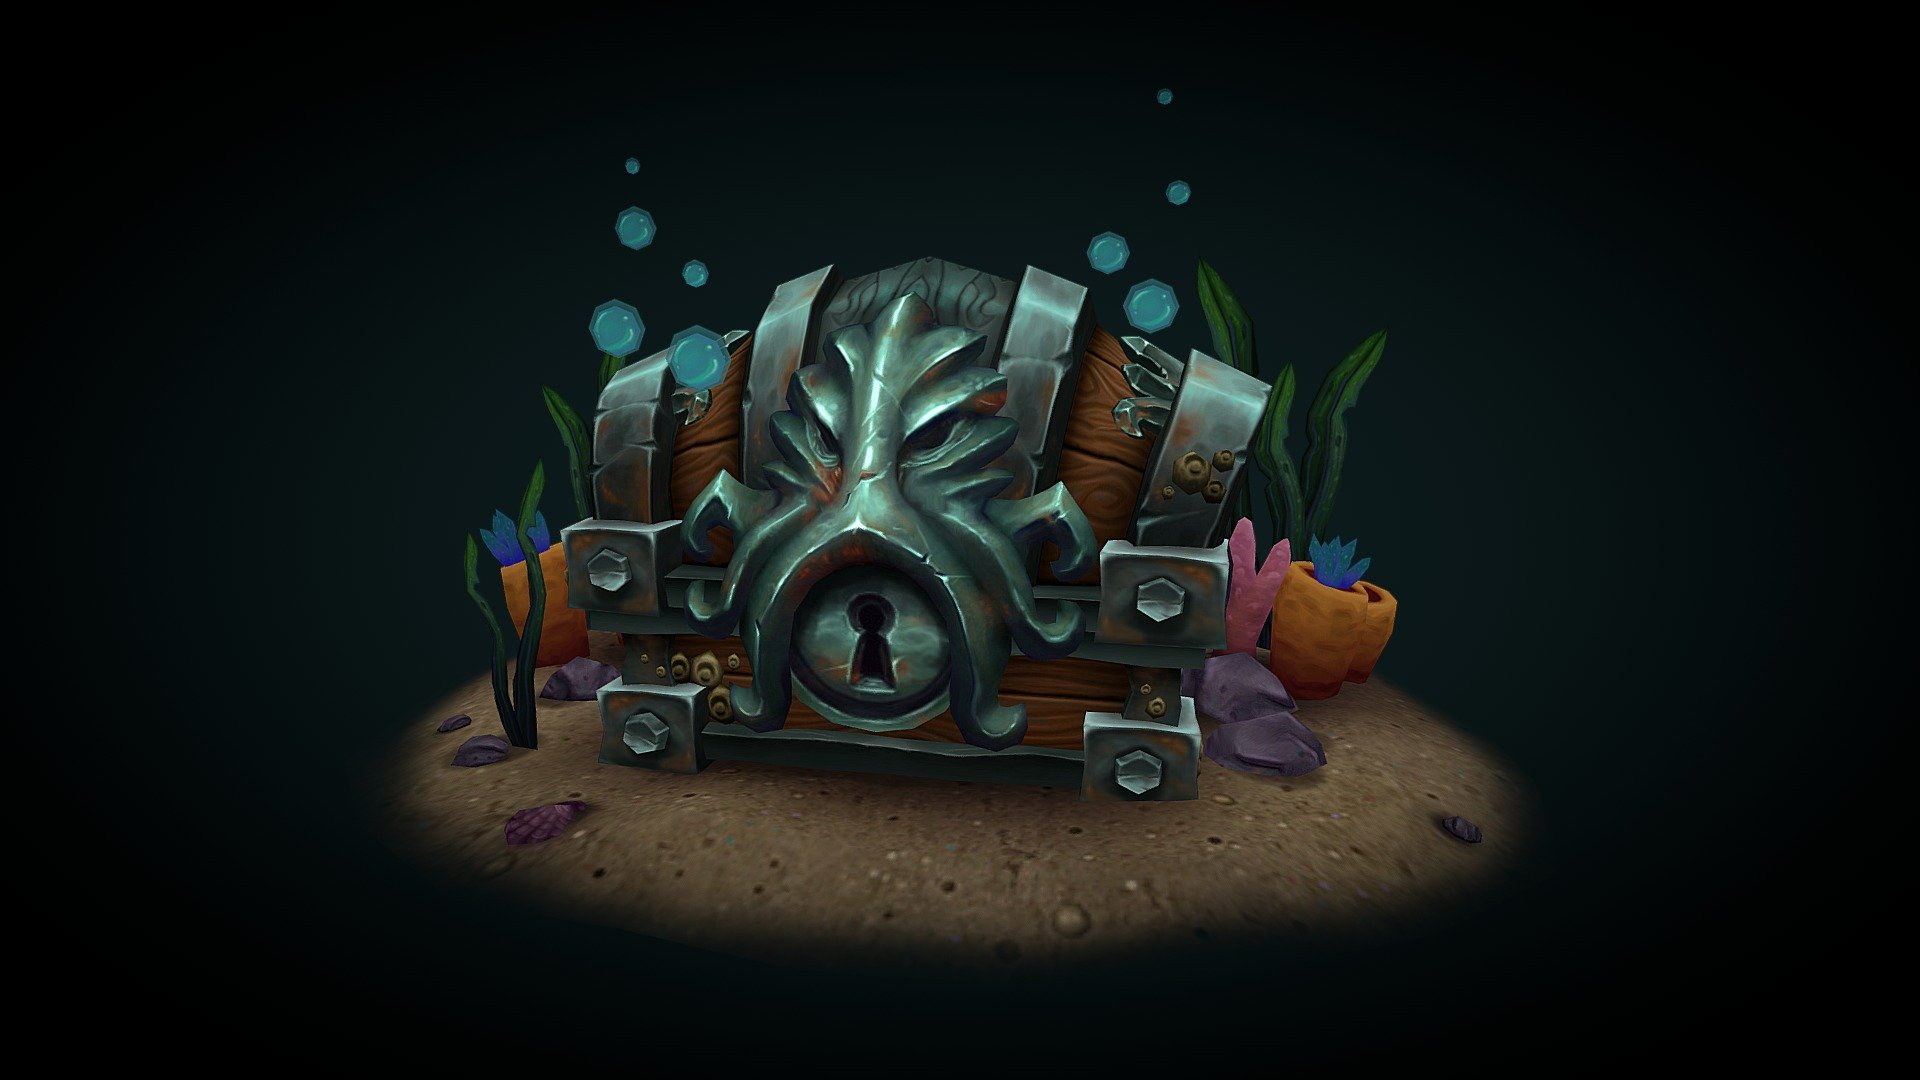 Hand painted treasure chest made during BrushForge class! Modeled in Maya, textured in Photoshop 3d model